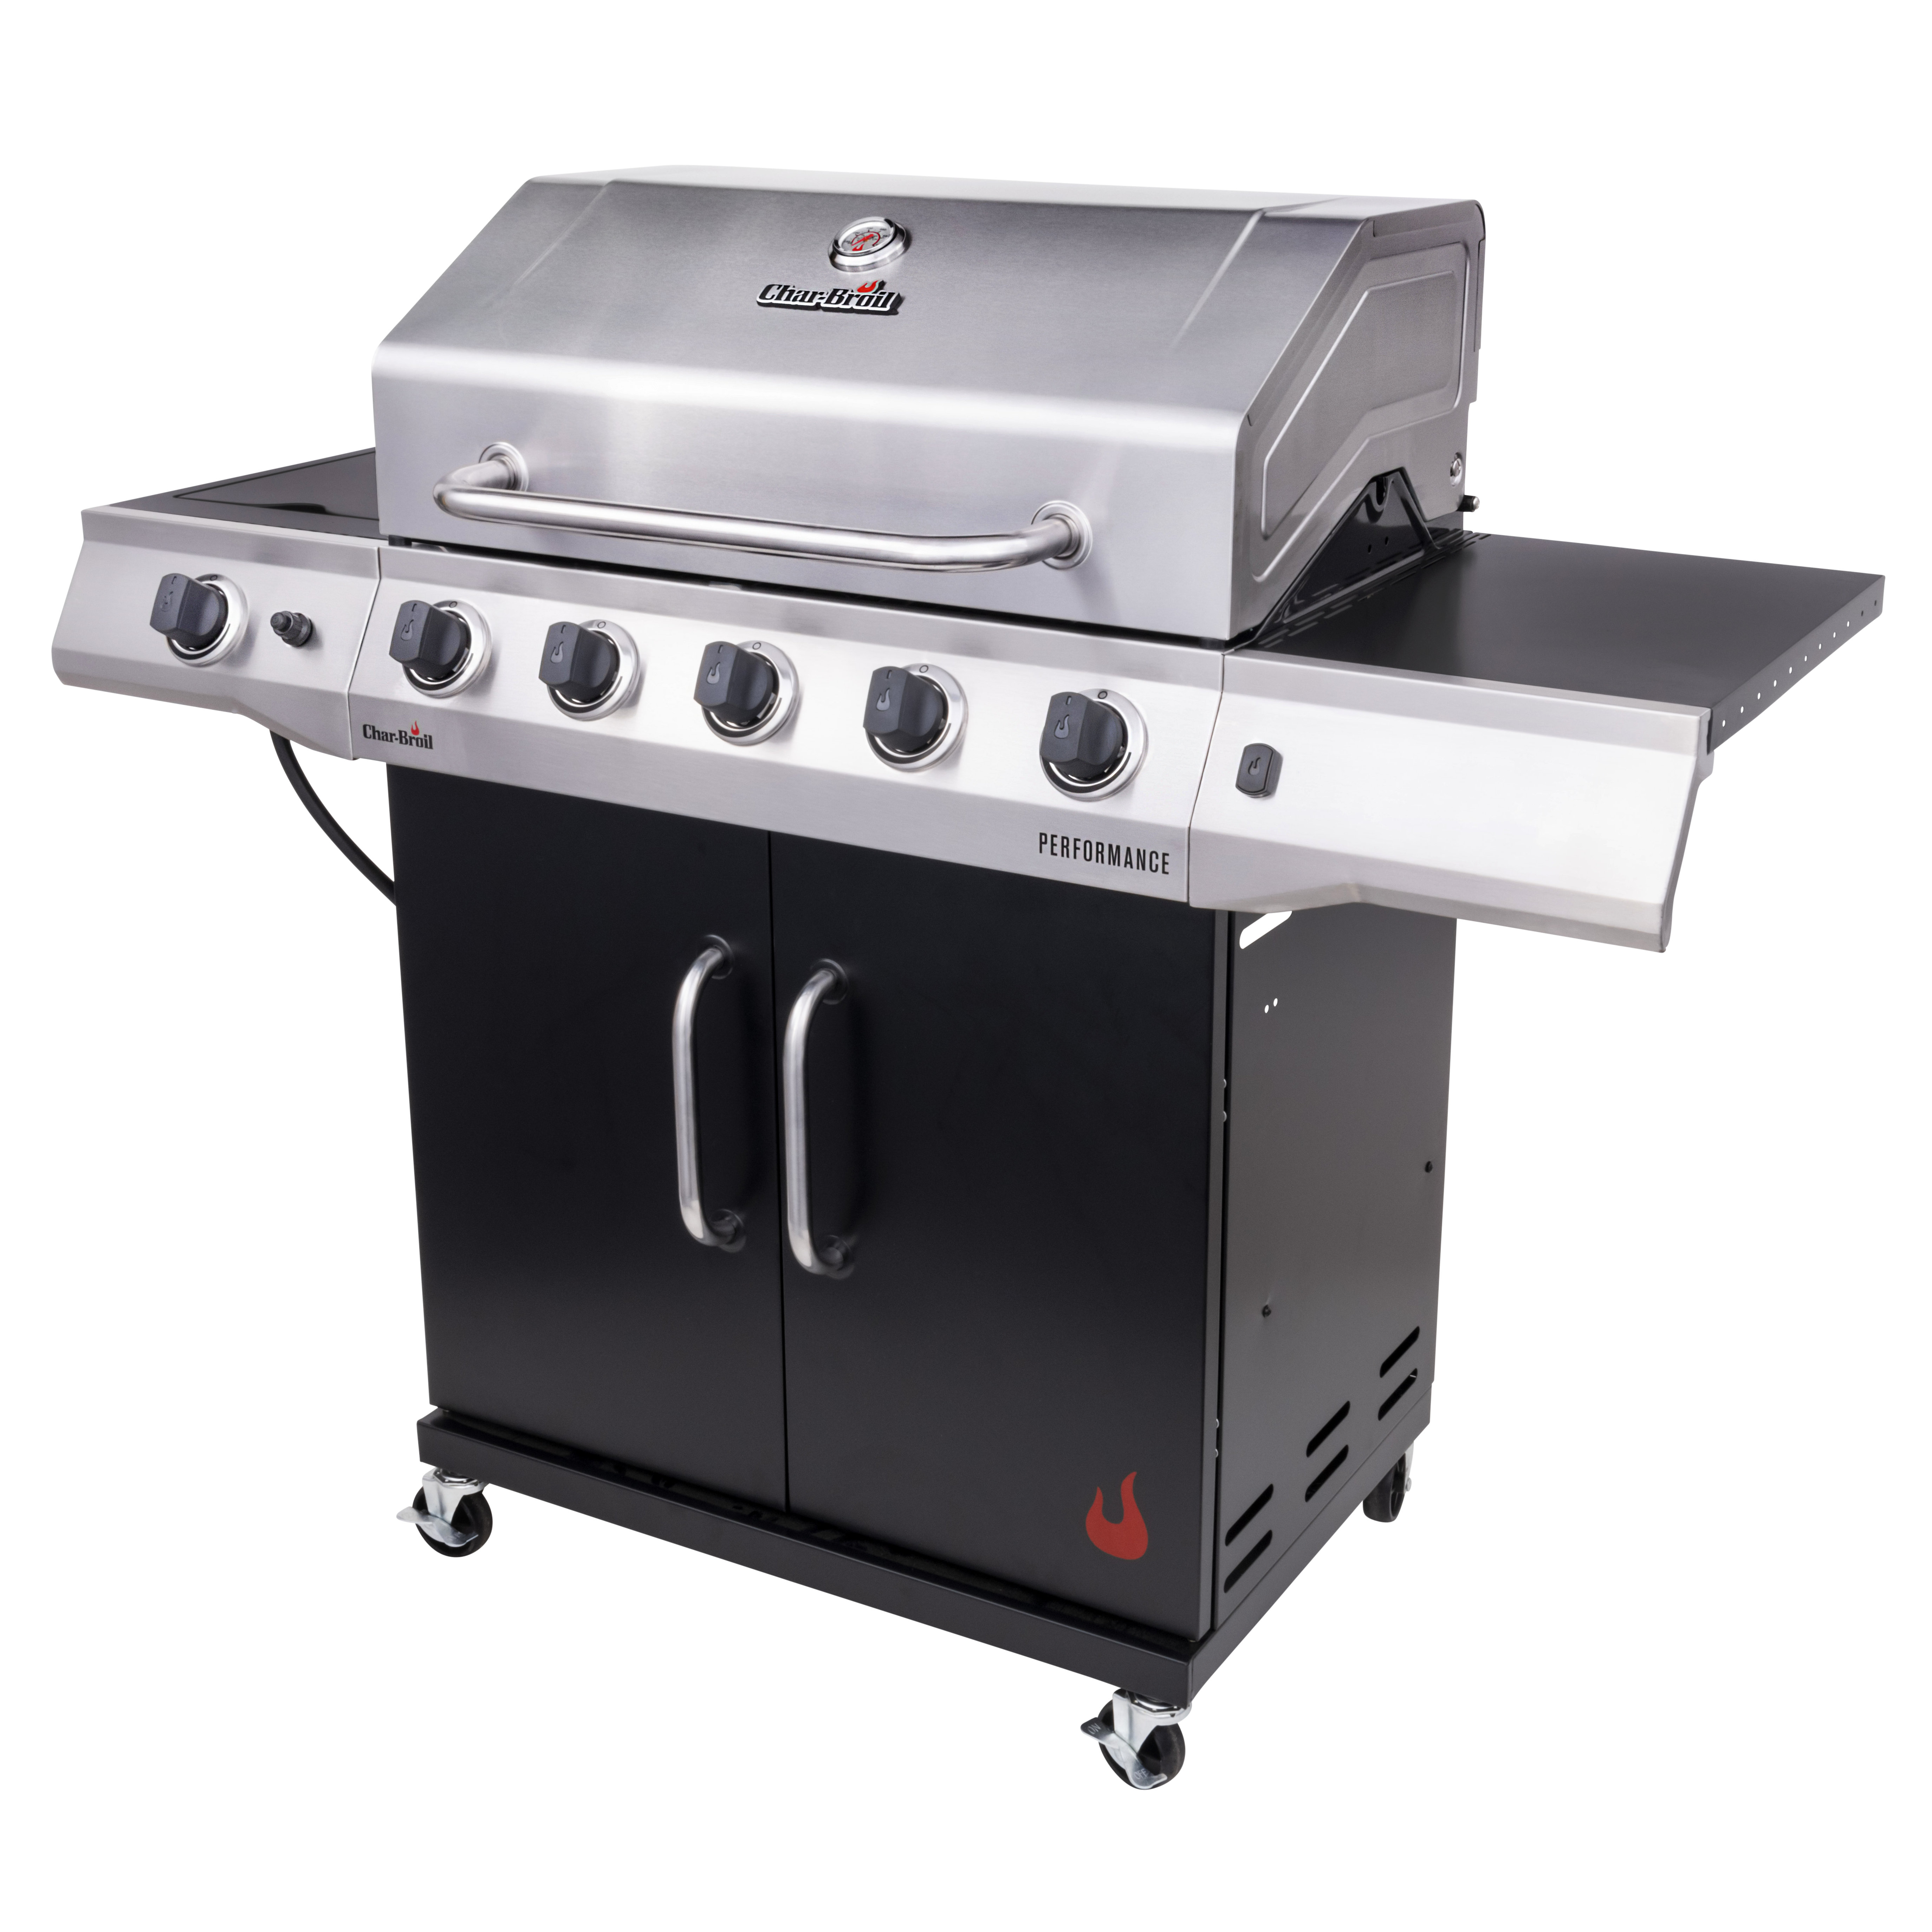 Char-Broil Vertical 45 Inch Liquid Propane Outdoor Steel Grill Gas